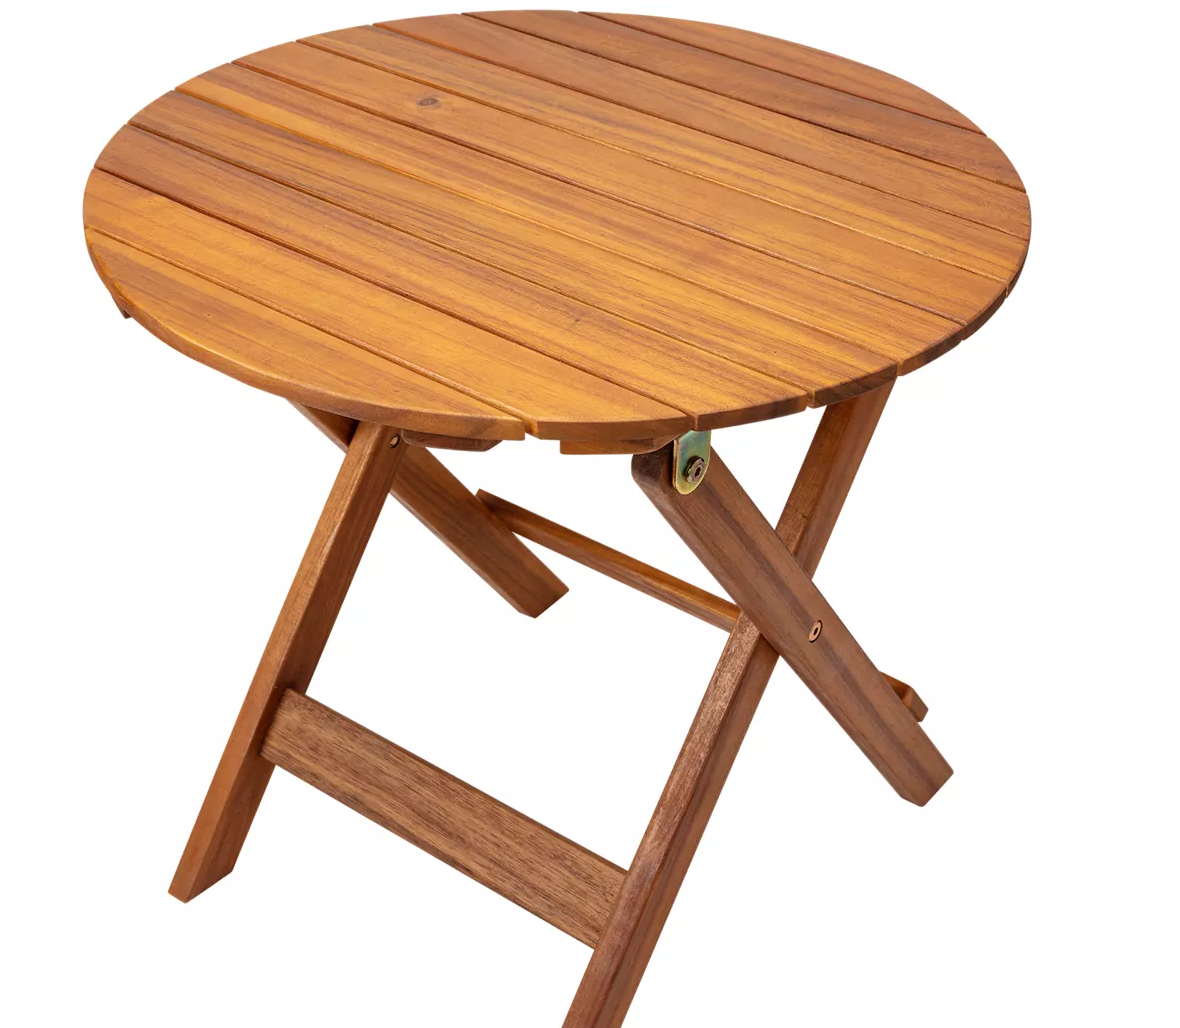 White River Home Natural Stain Foldable Round Side Table (Regularly 49.99, on sale 24.98 at Bass Pro Shop) #ad